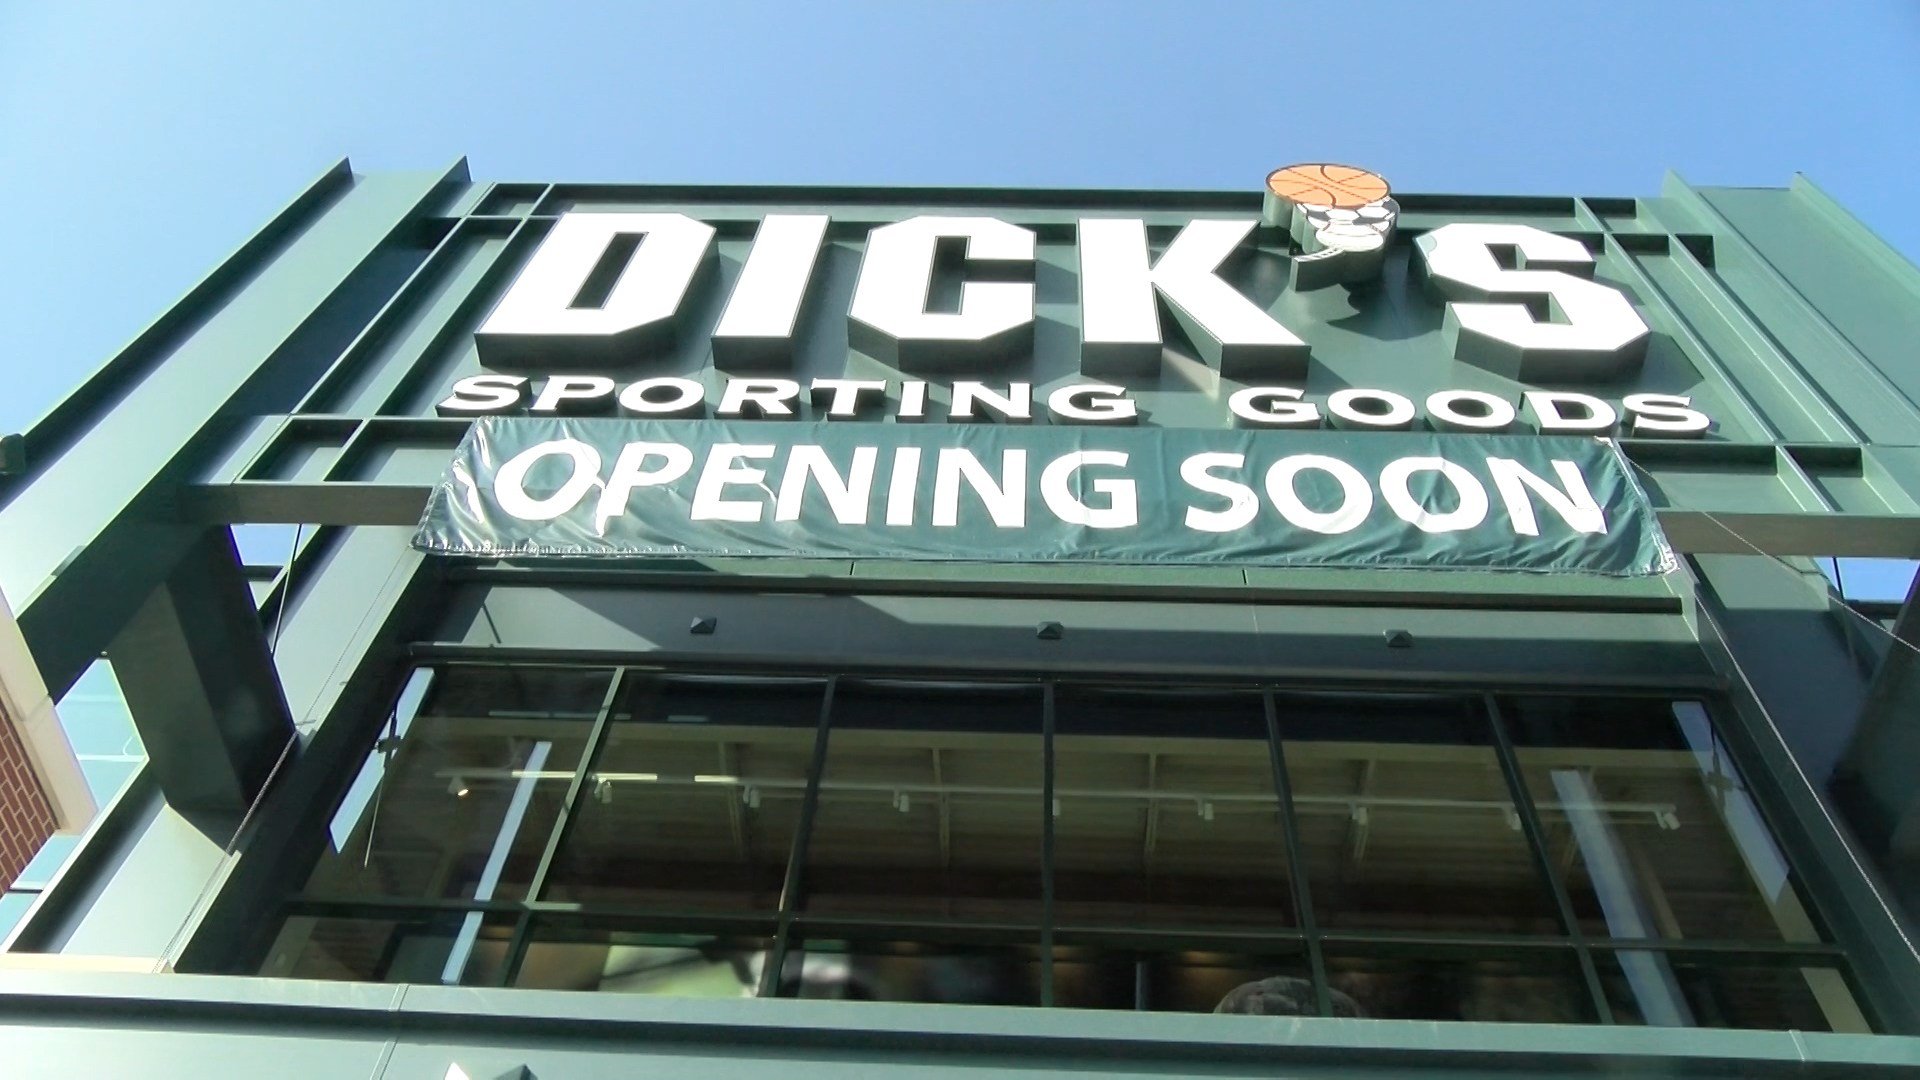 Lincoln: Dick's opens Friday, Scheels to open September 2018